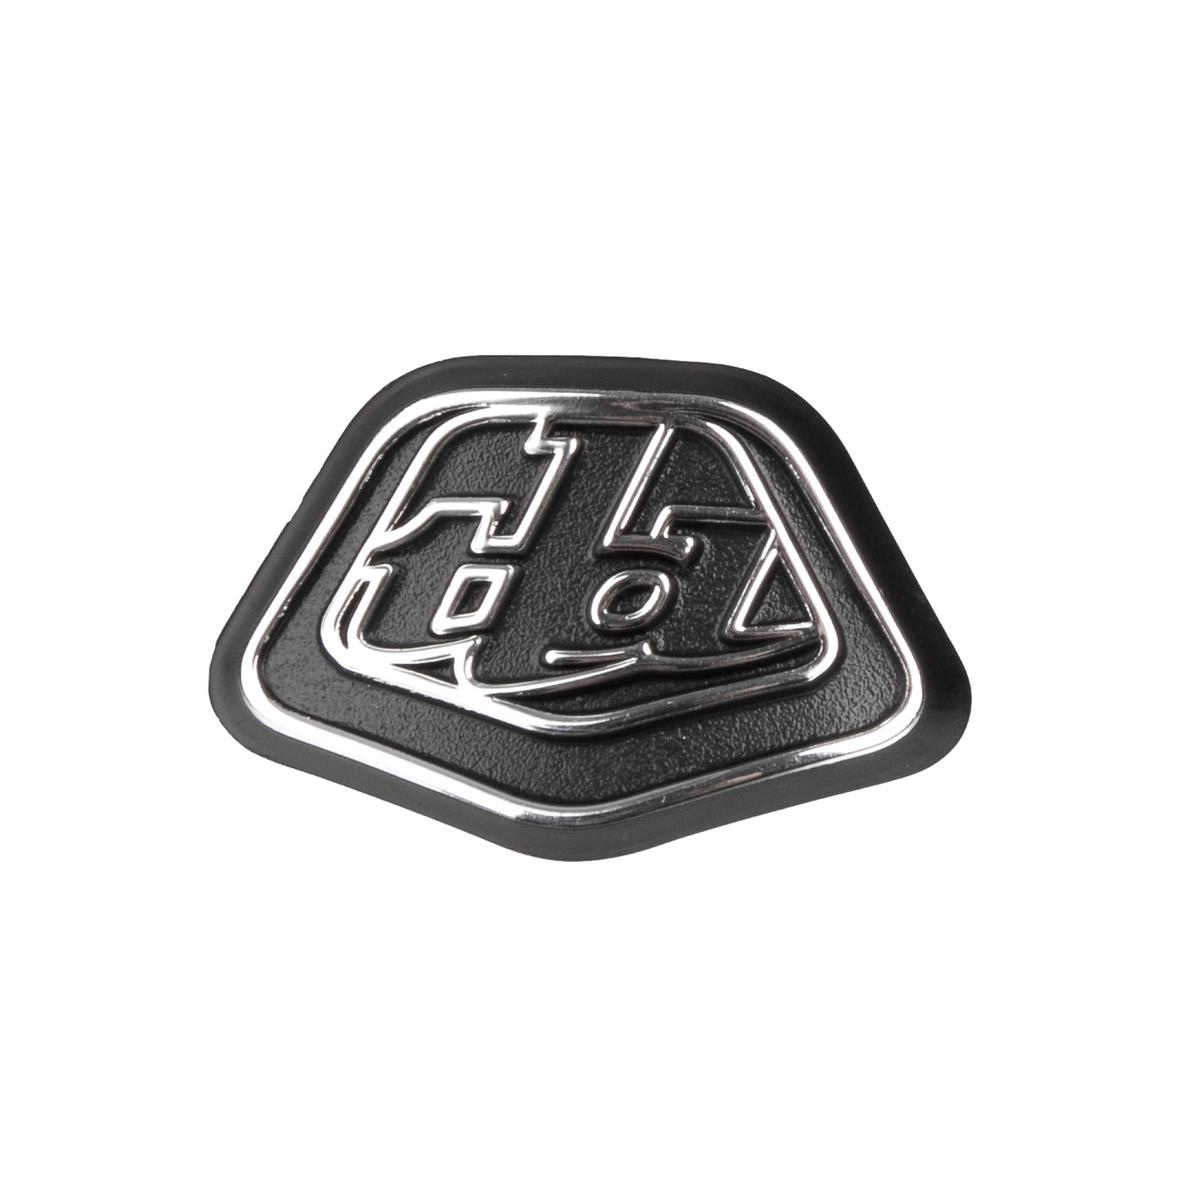 Troy Lee Designs Replacement Part for Chin Guard SE4 Black